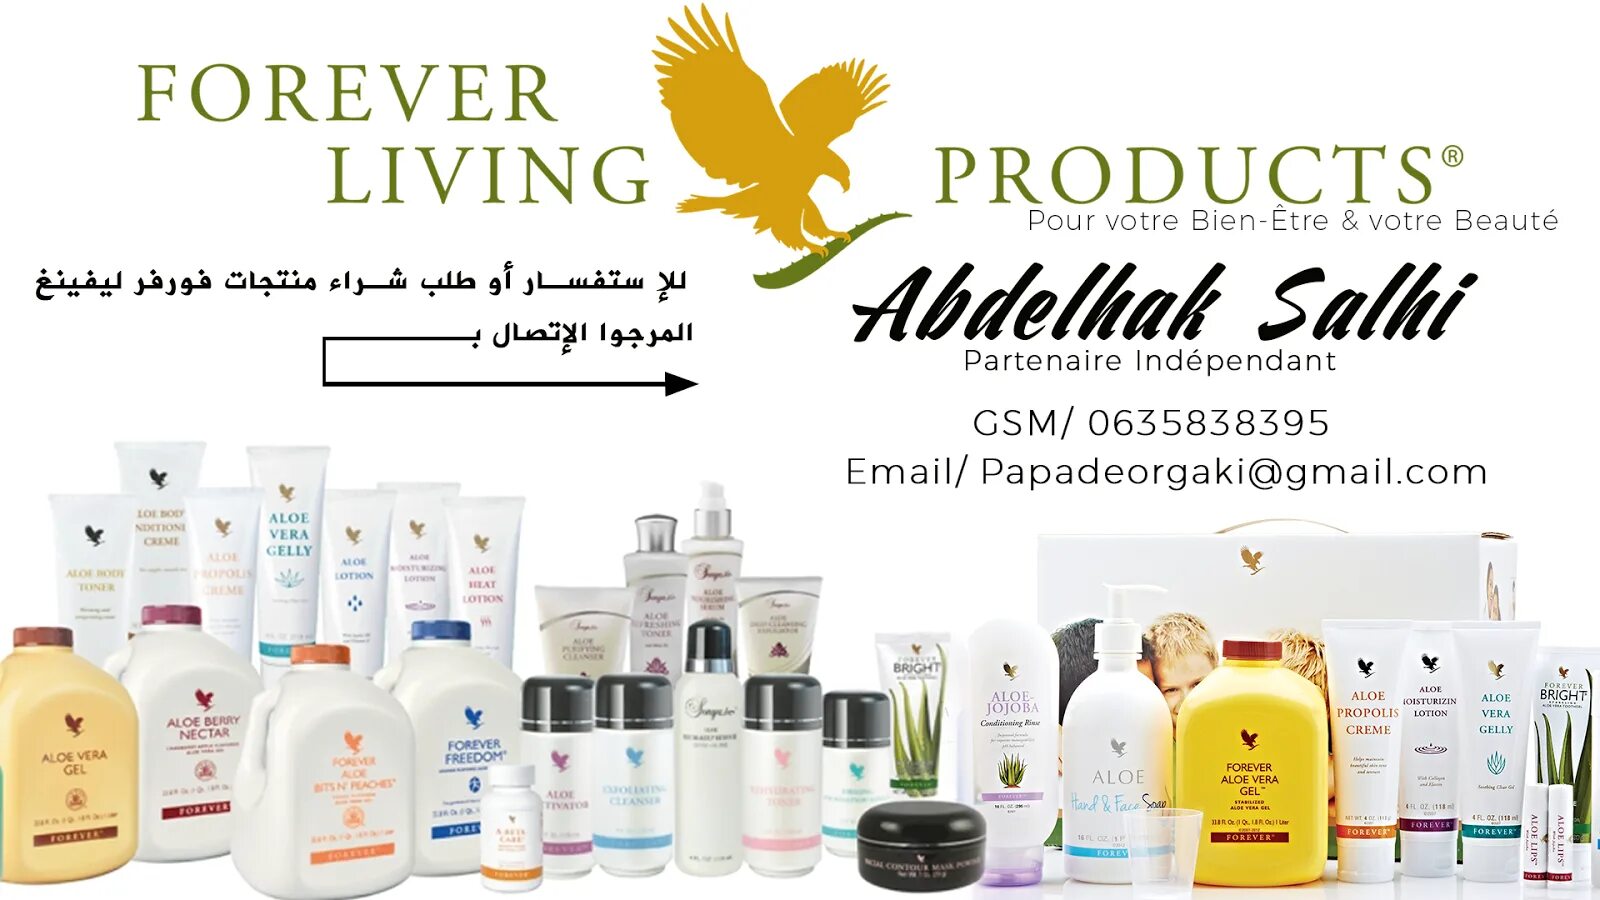 Forever Living products. Картинки Forever Living products. Форевер компании косметика. Live product